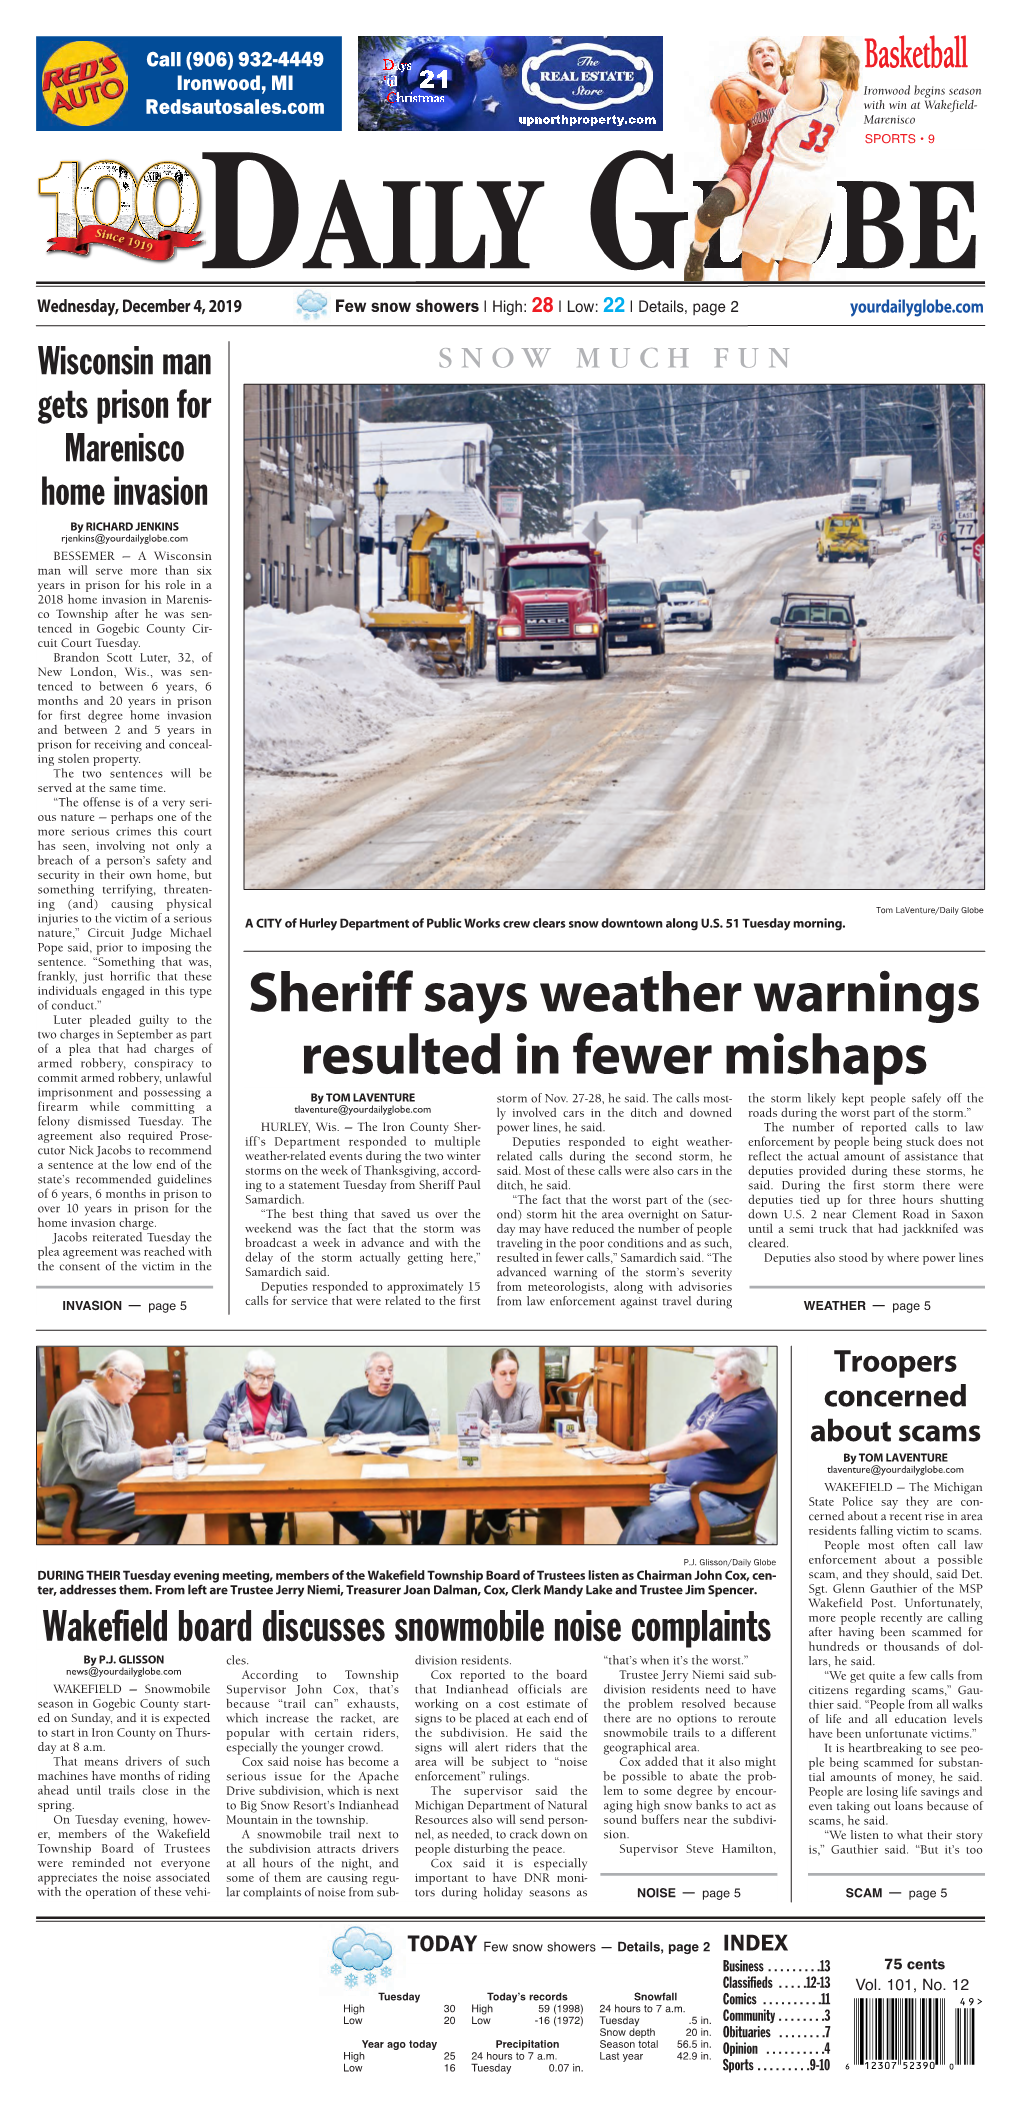 Sheriff Says Weather Warnings Resulted in Fewer Mishaps